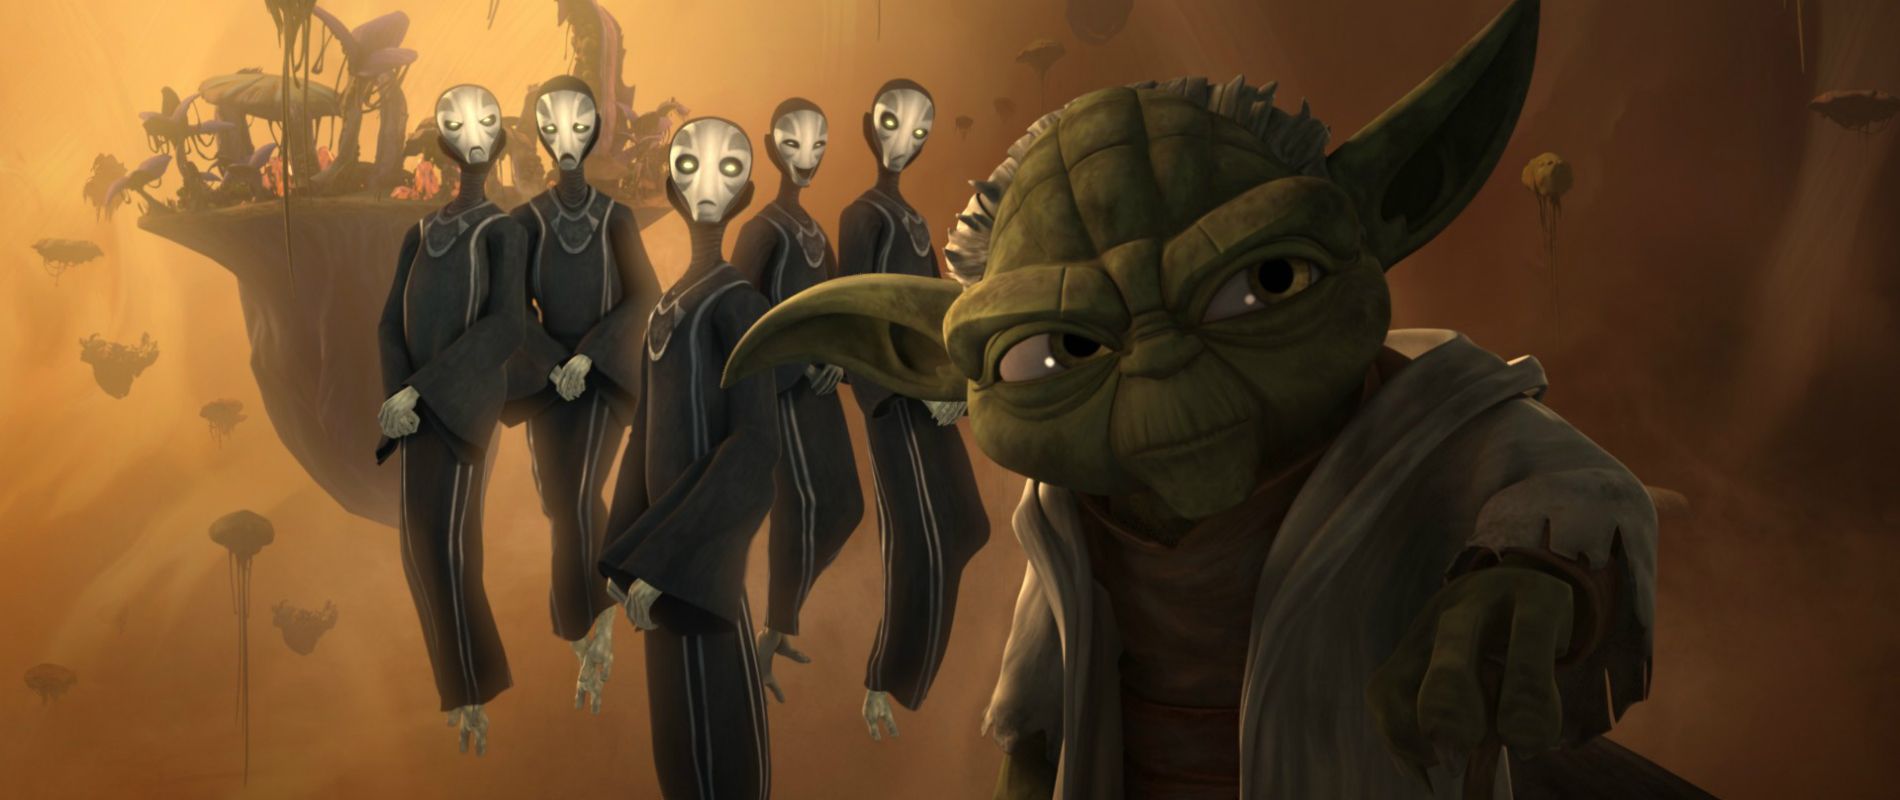 Yoda stands in front of the Five Priesteses in Star Wars: The Clone Wars